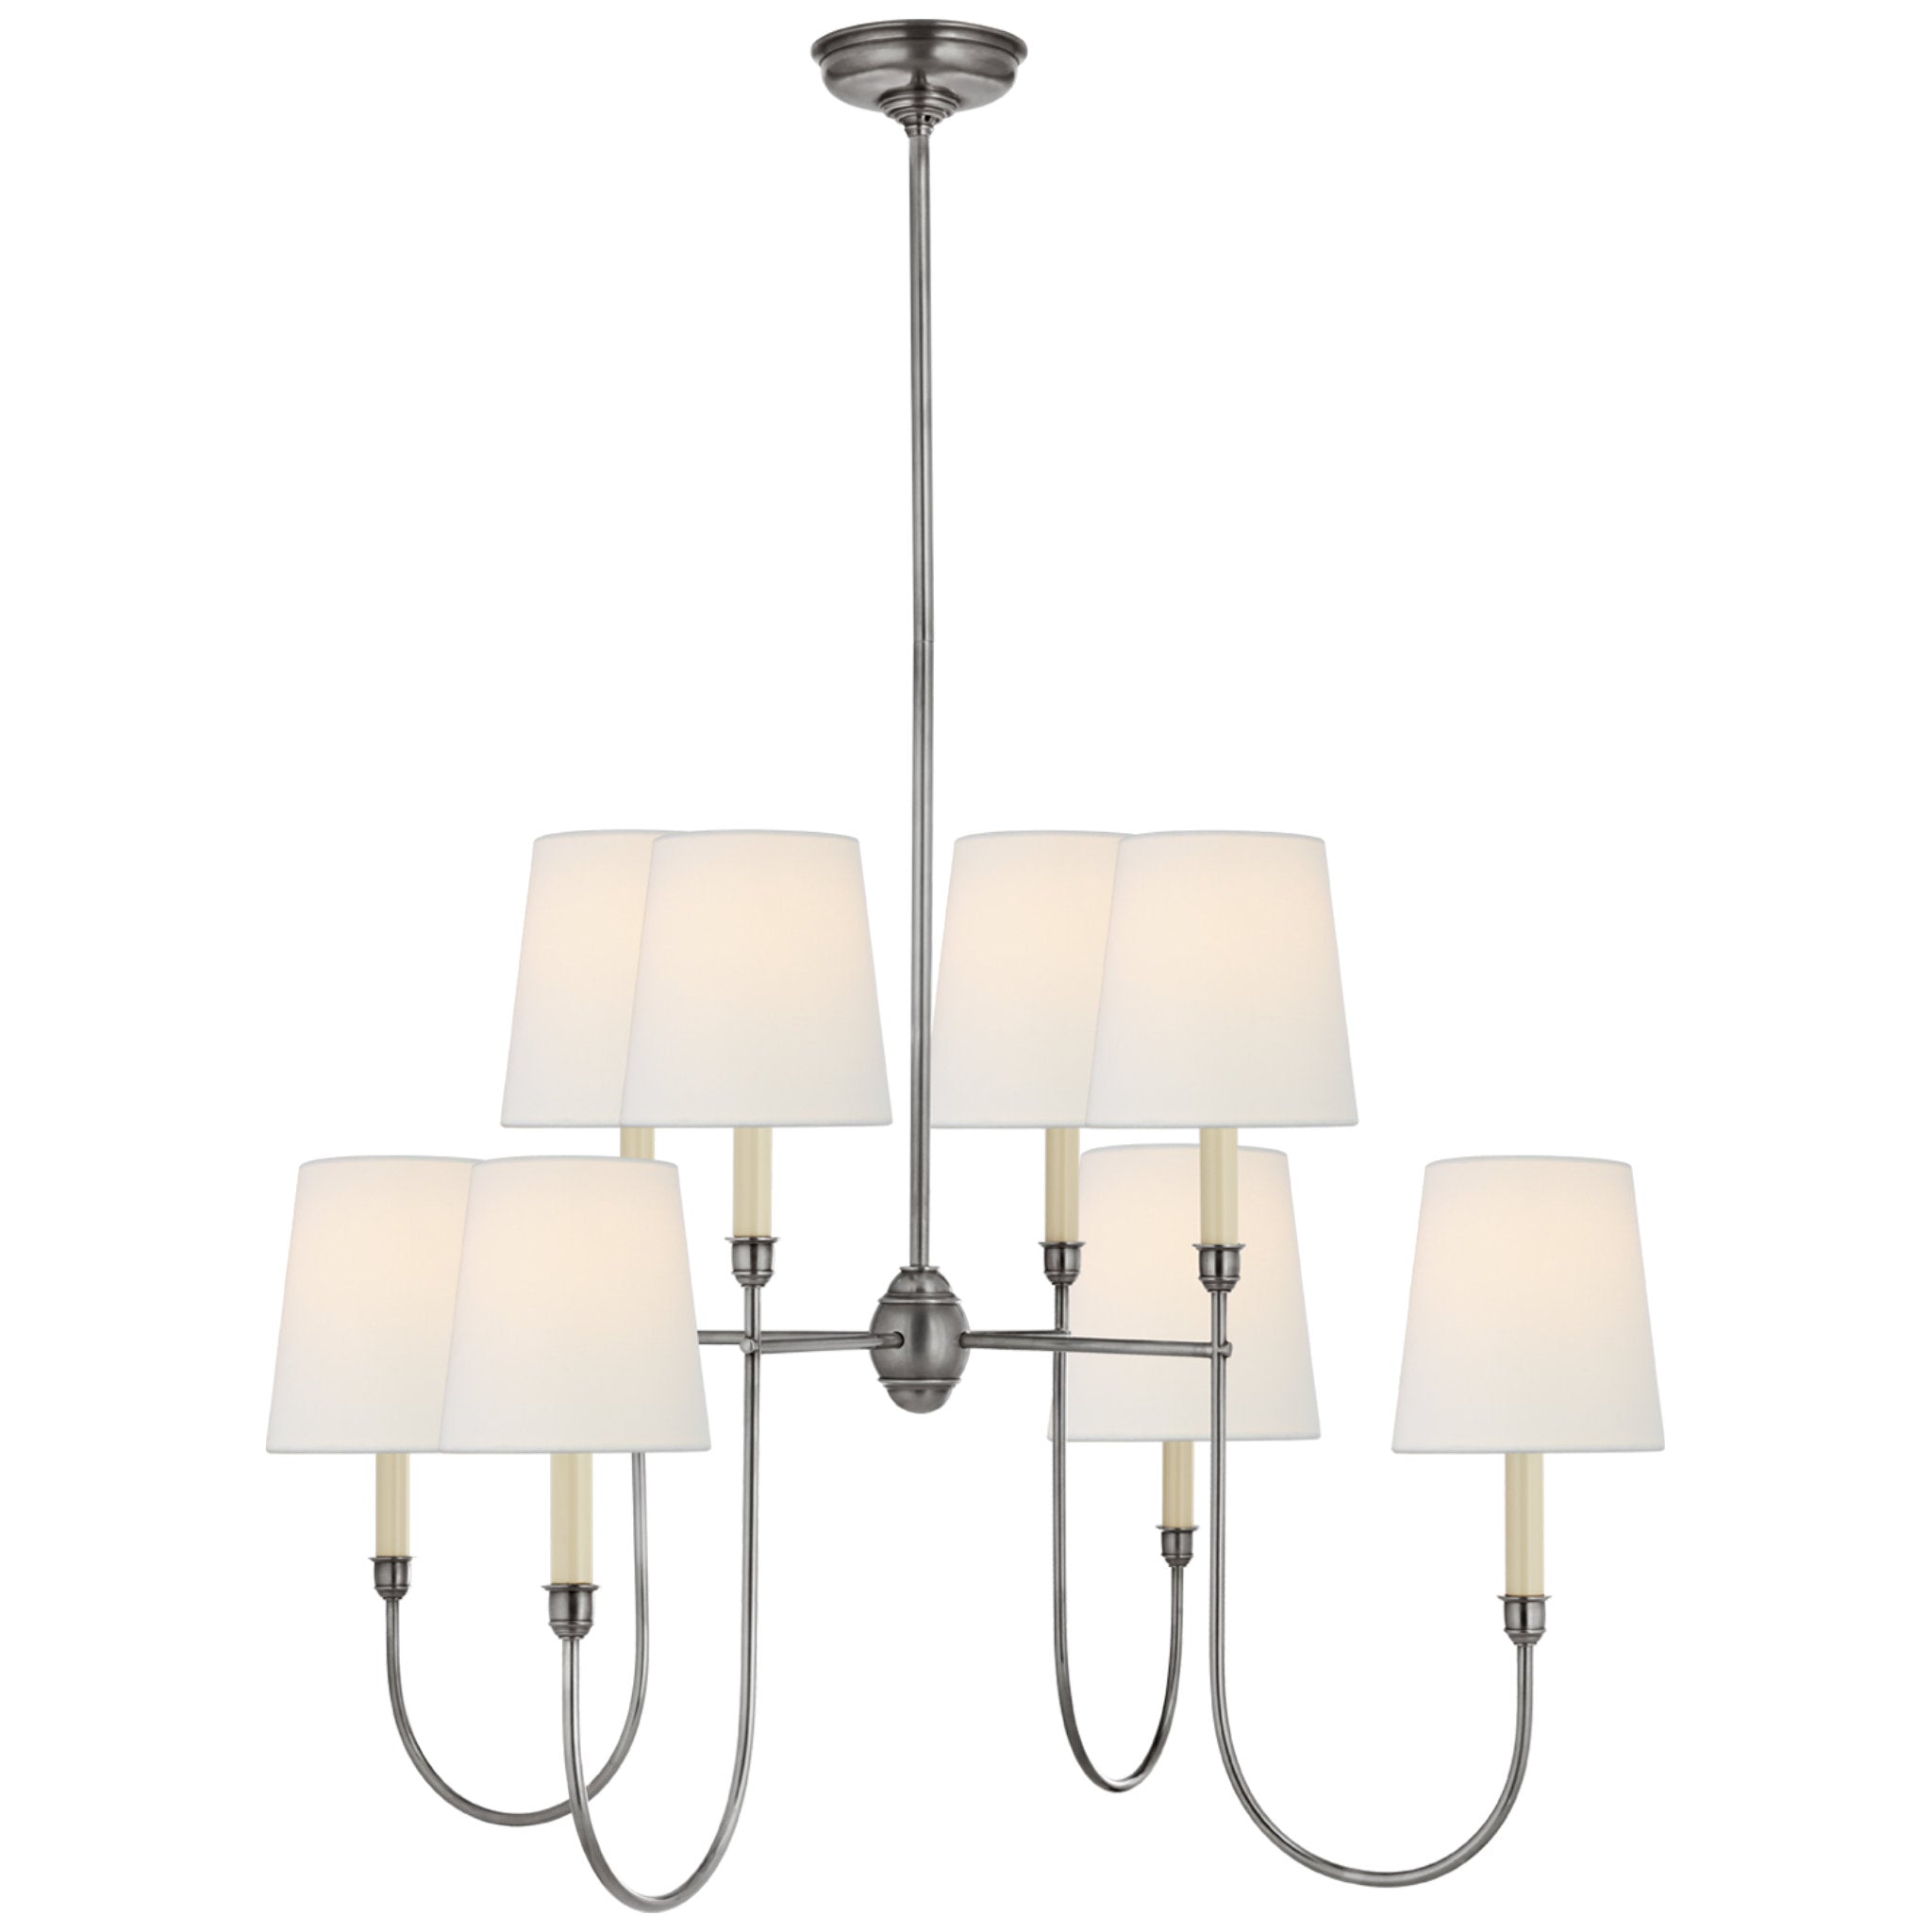 Thomas O'Brien Vendome Large Chandelier in Antique Silver with Linen Shades